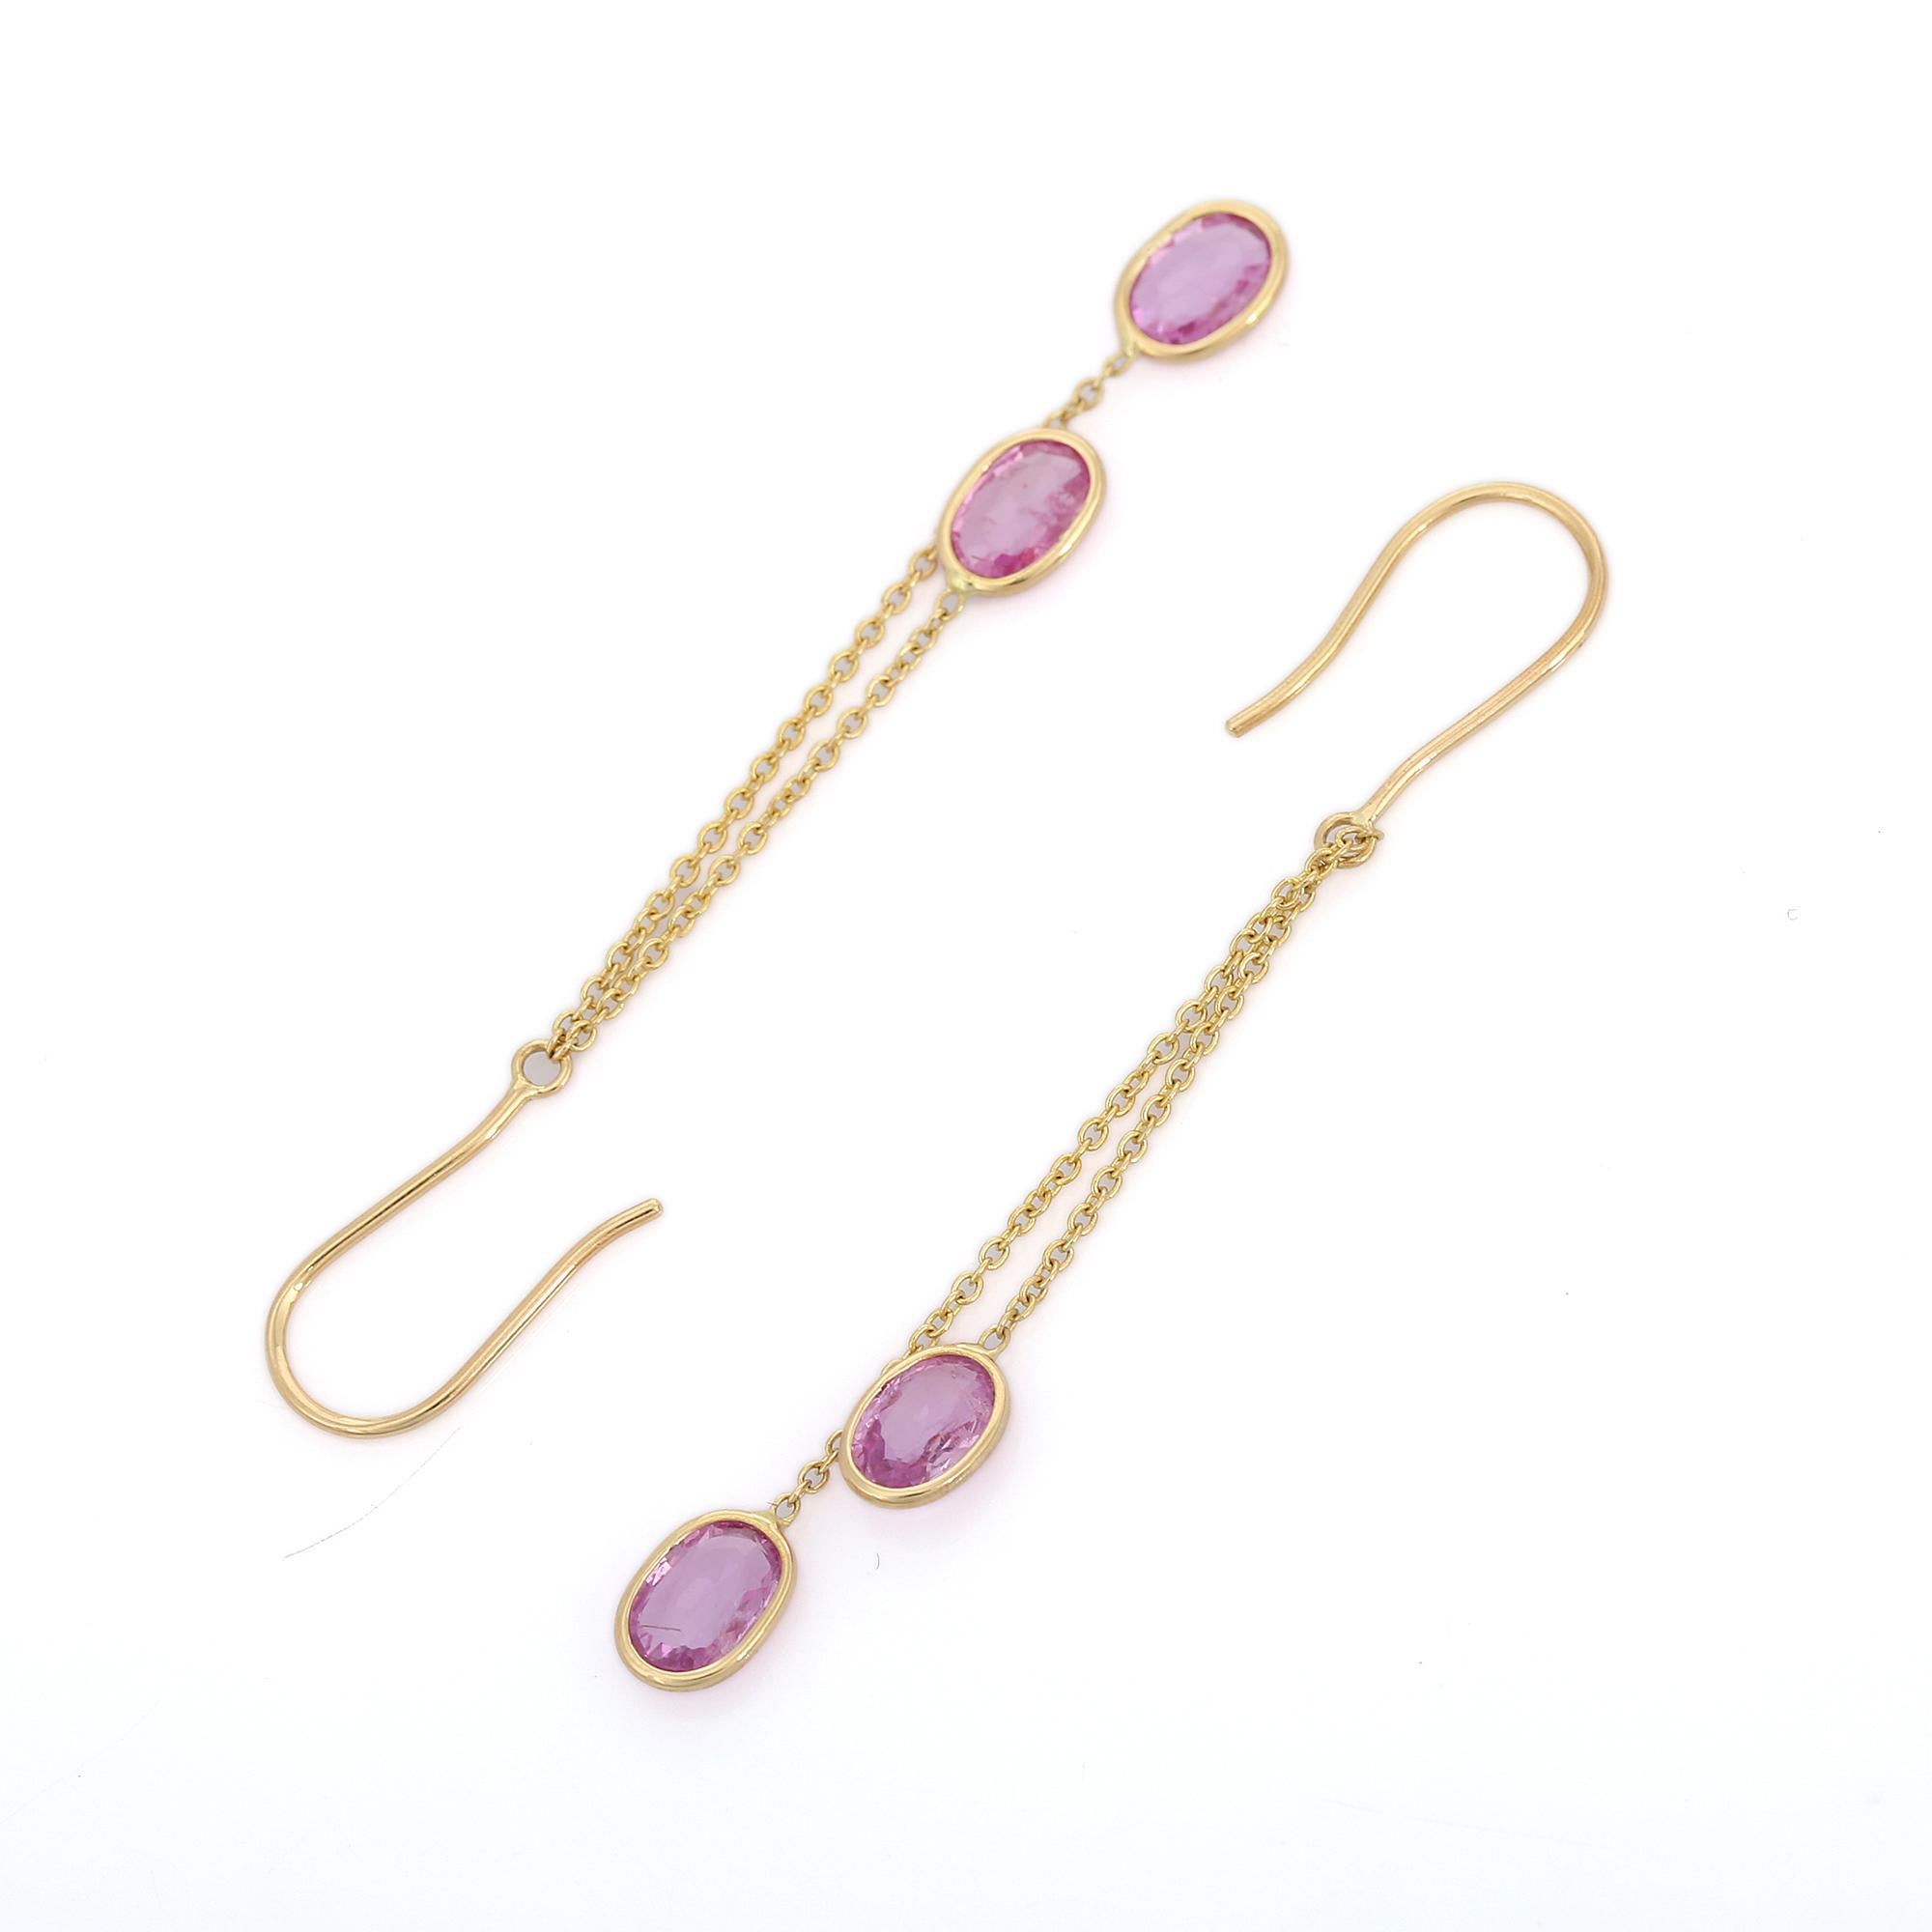 18K Yellow Gold Double Layered Pink Sapphire Dangle earrings to make a statement with your look. These earrings create a sparkling, luxurious look featuring oval cut gemstone.
If you love to gravitate towards unique styles, this piece of jewelry is